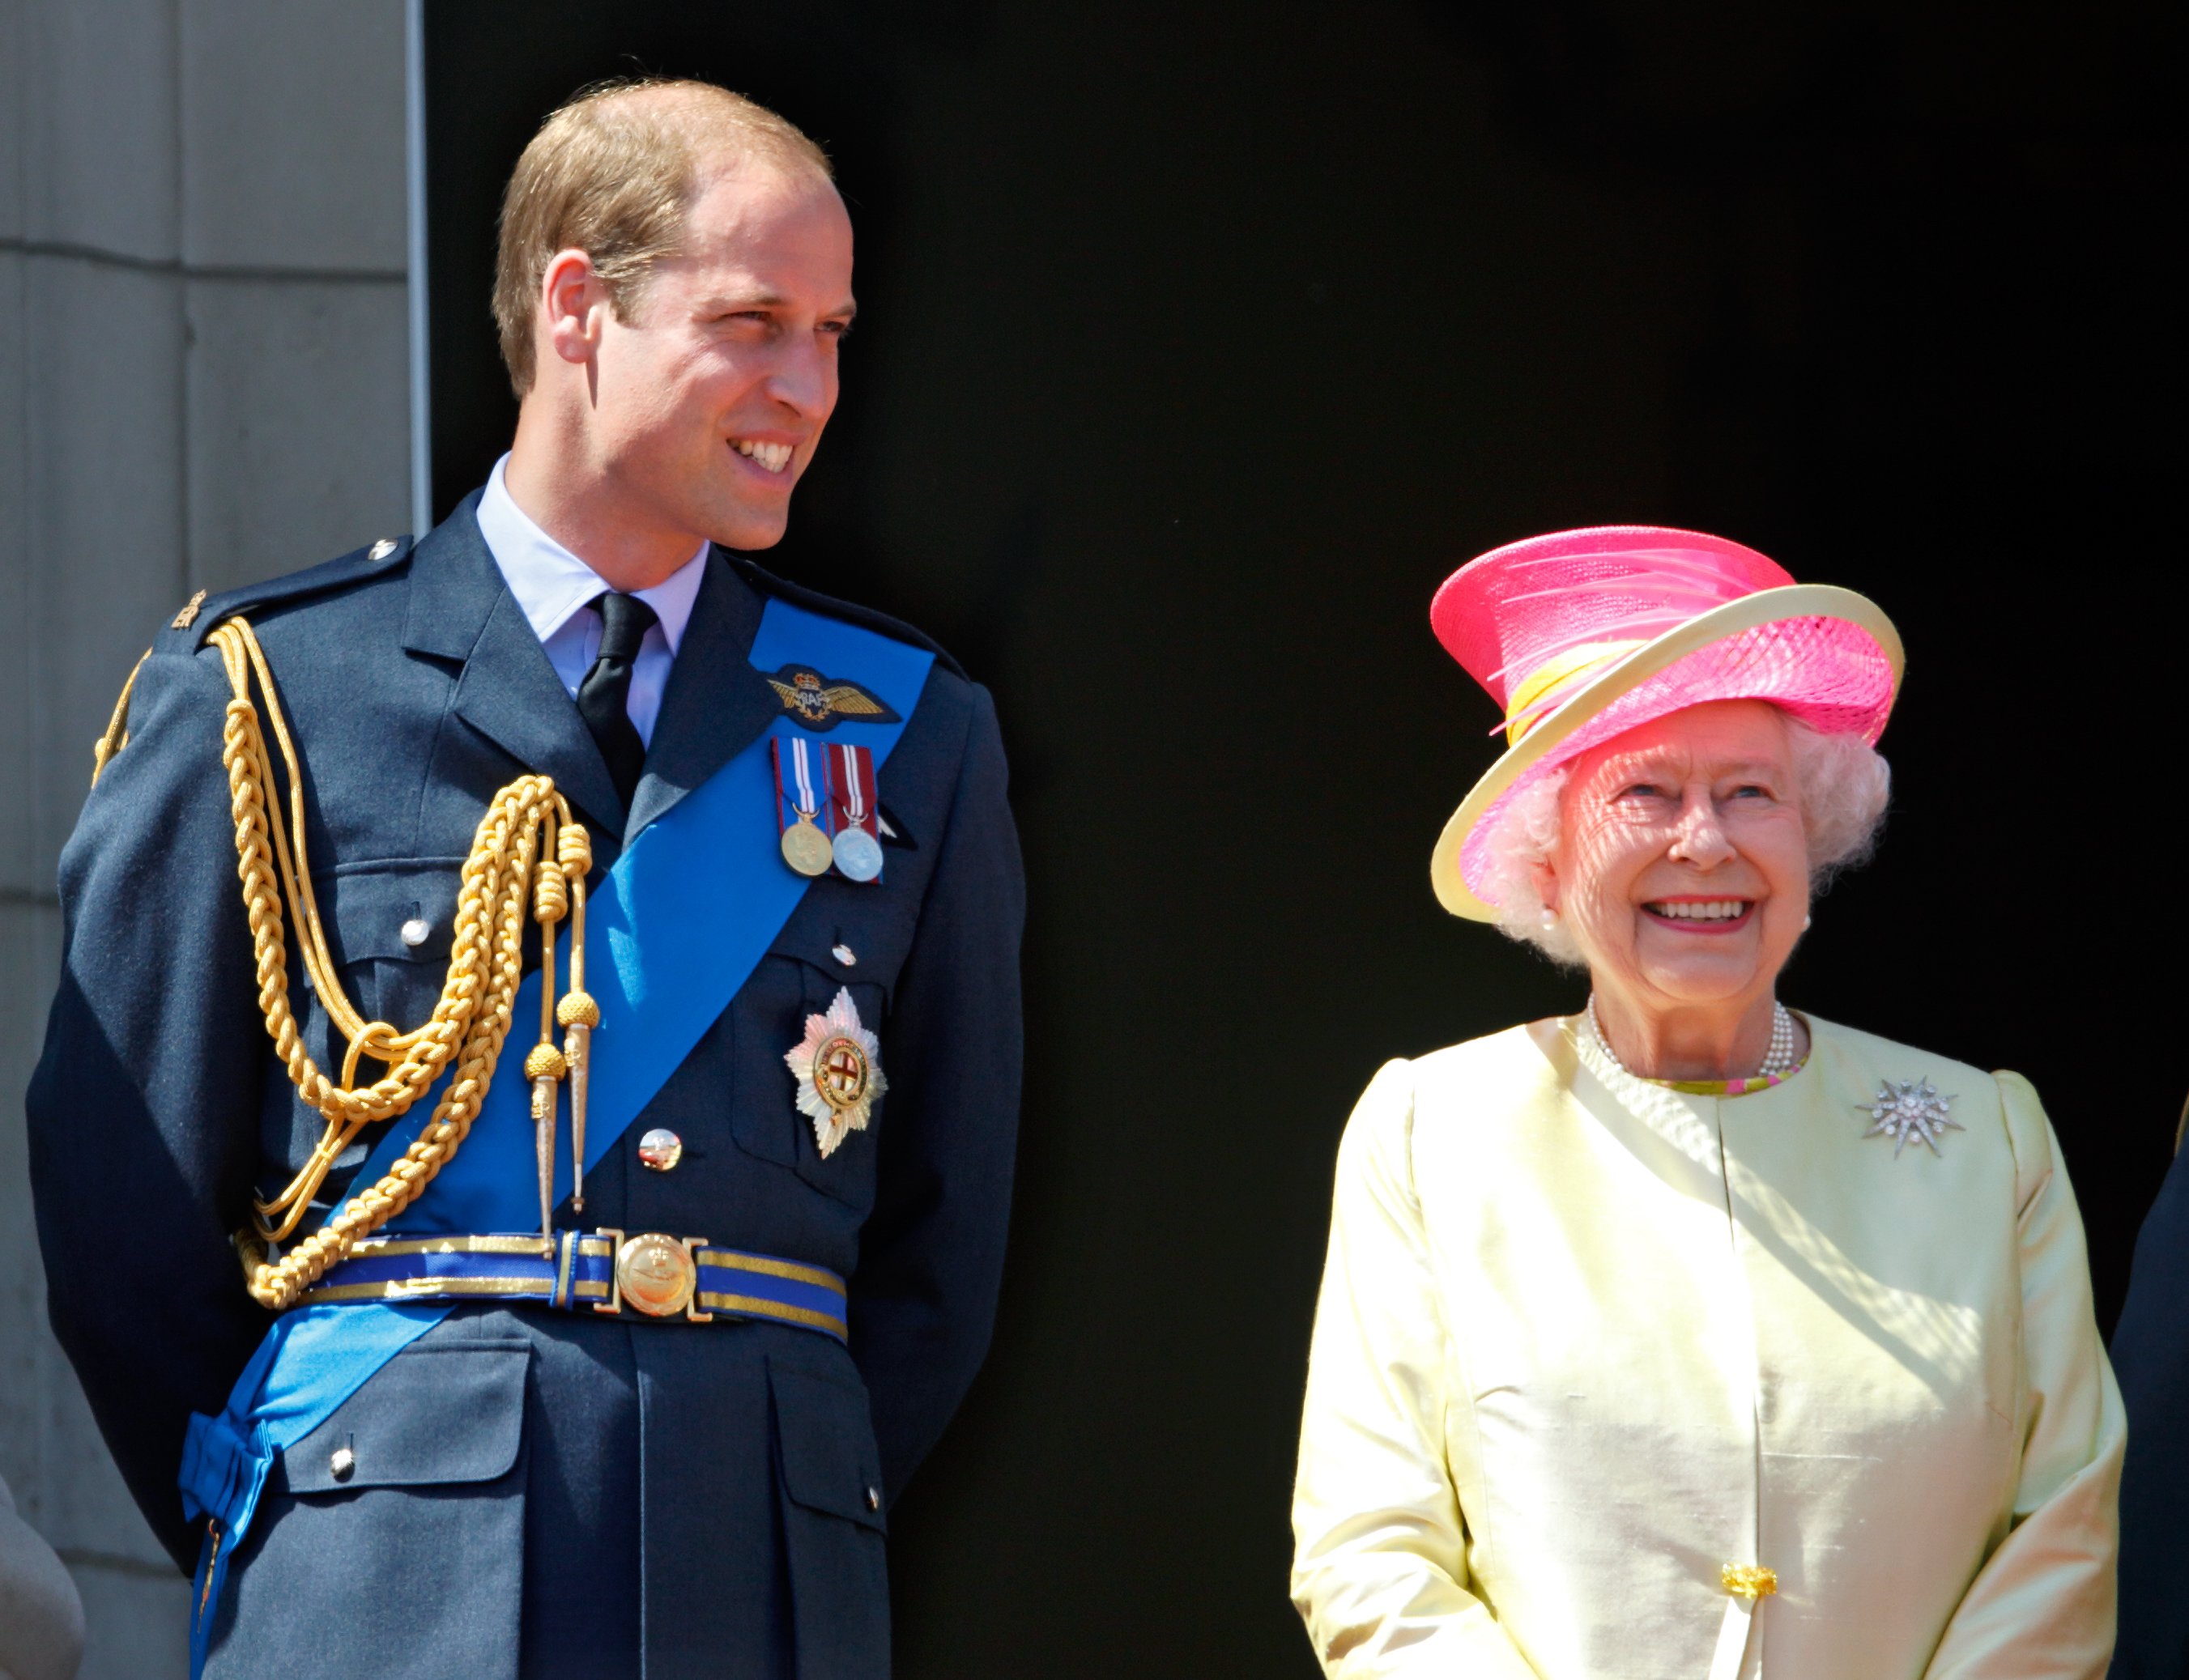 Prince William and Queen Elizabeth II watch a flypast of Spitfire & Hurricane aircraft from the balcony of Buckingham Palace on July 10, 2015 in London, England | Source: Getty Images